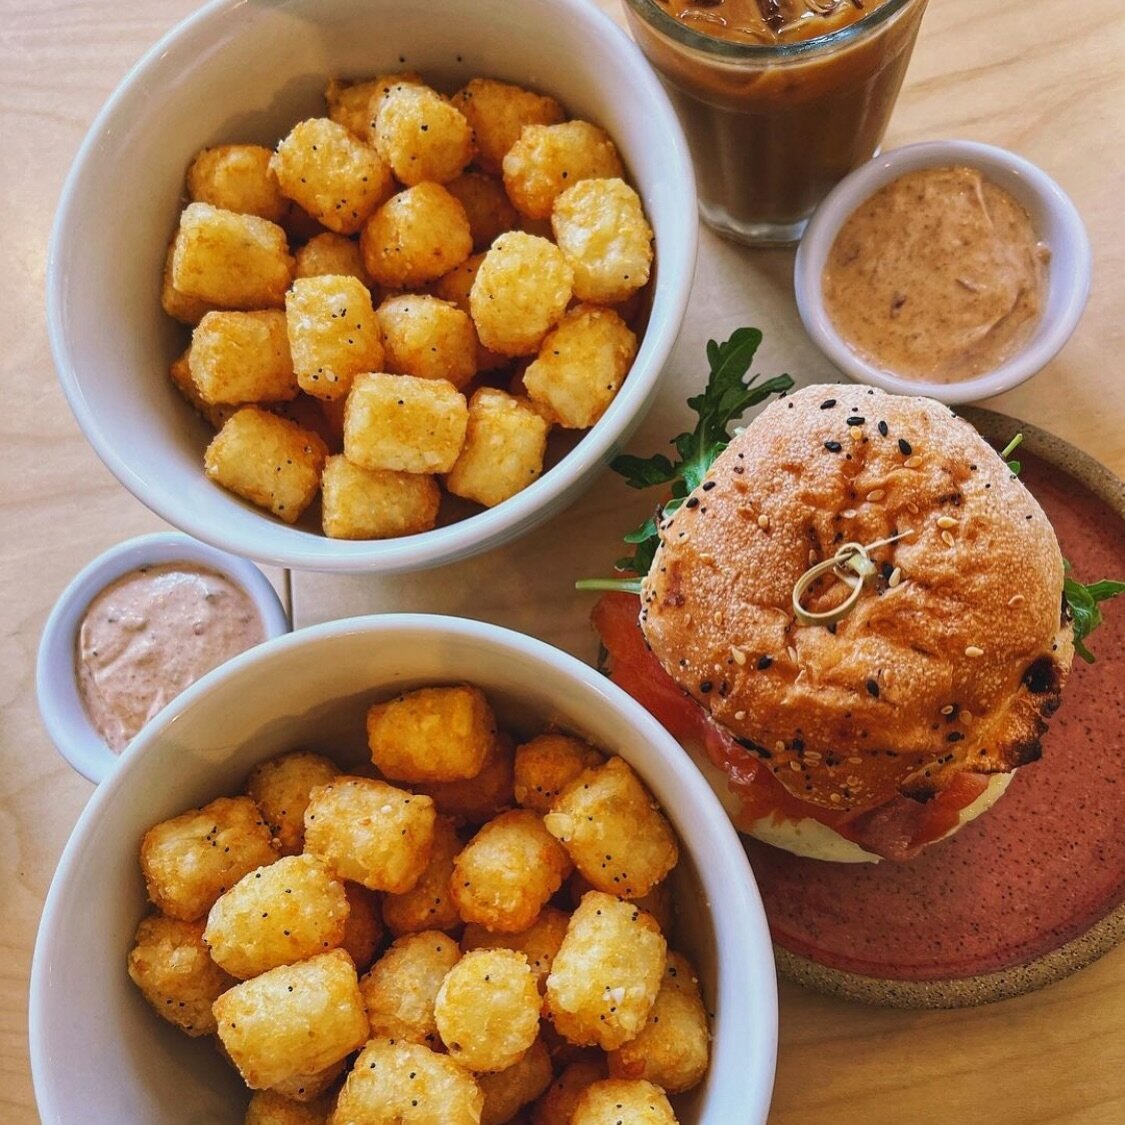 Two servings of tots are required on days like today&hellip;Get out of the cold and warm up with our hot drinks and delicious food!

7am - 2pm Monday - Friday
8am - 3pm Saturday + Sunday